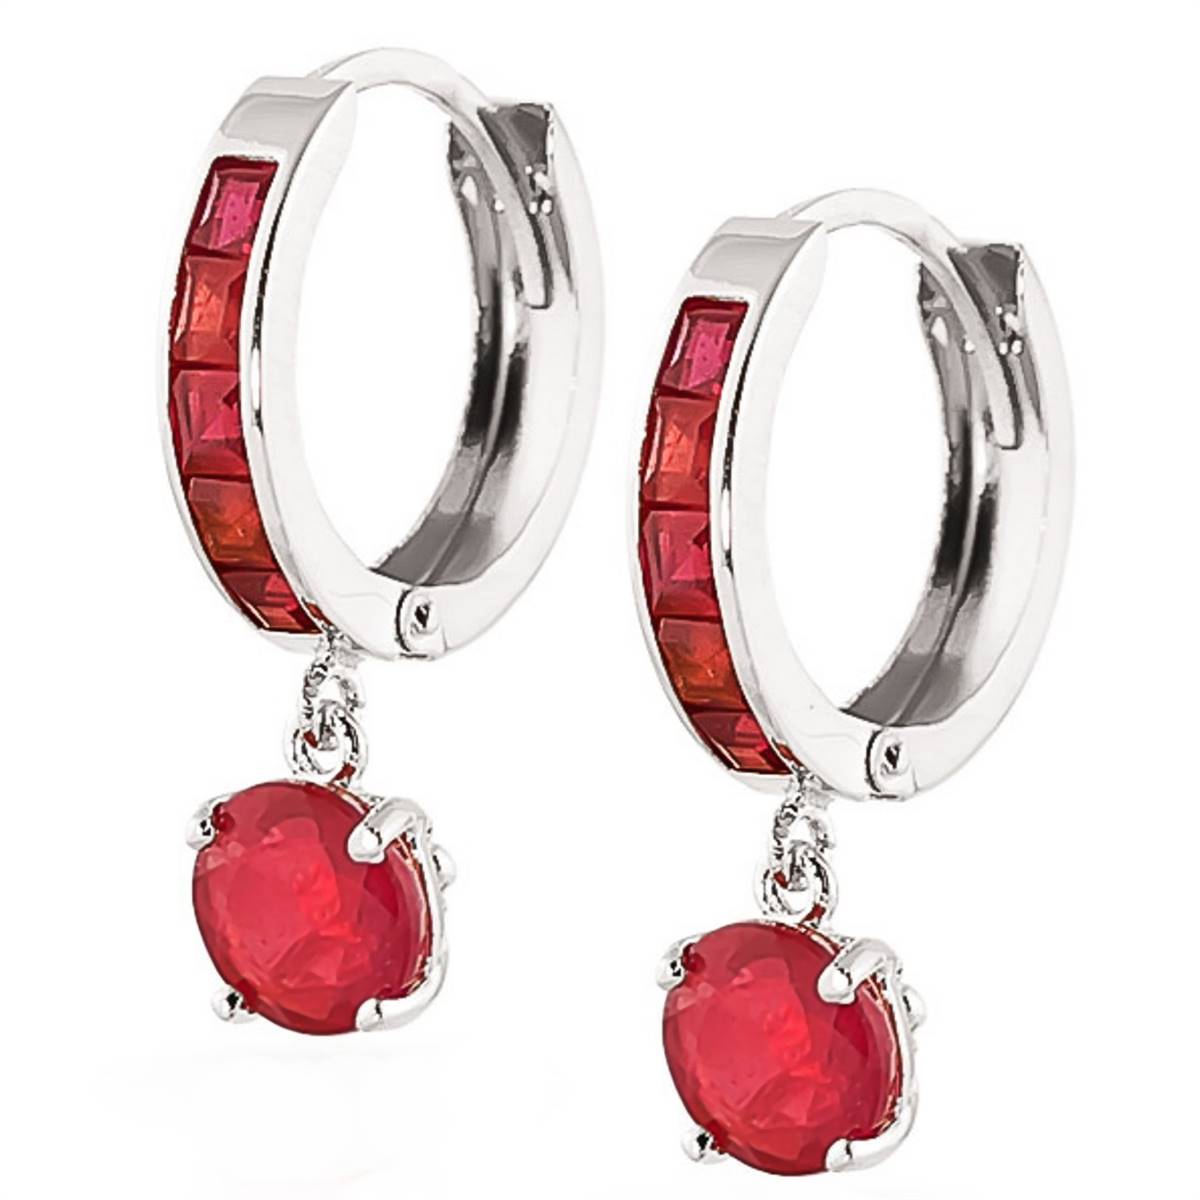 3.3 Carat 14K Solid White Gold Huggie Earrings Natural Ruby